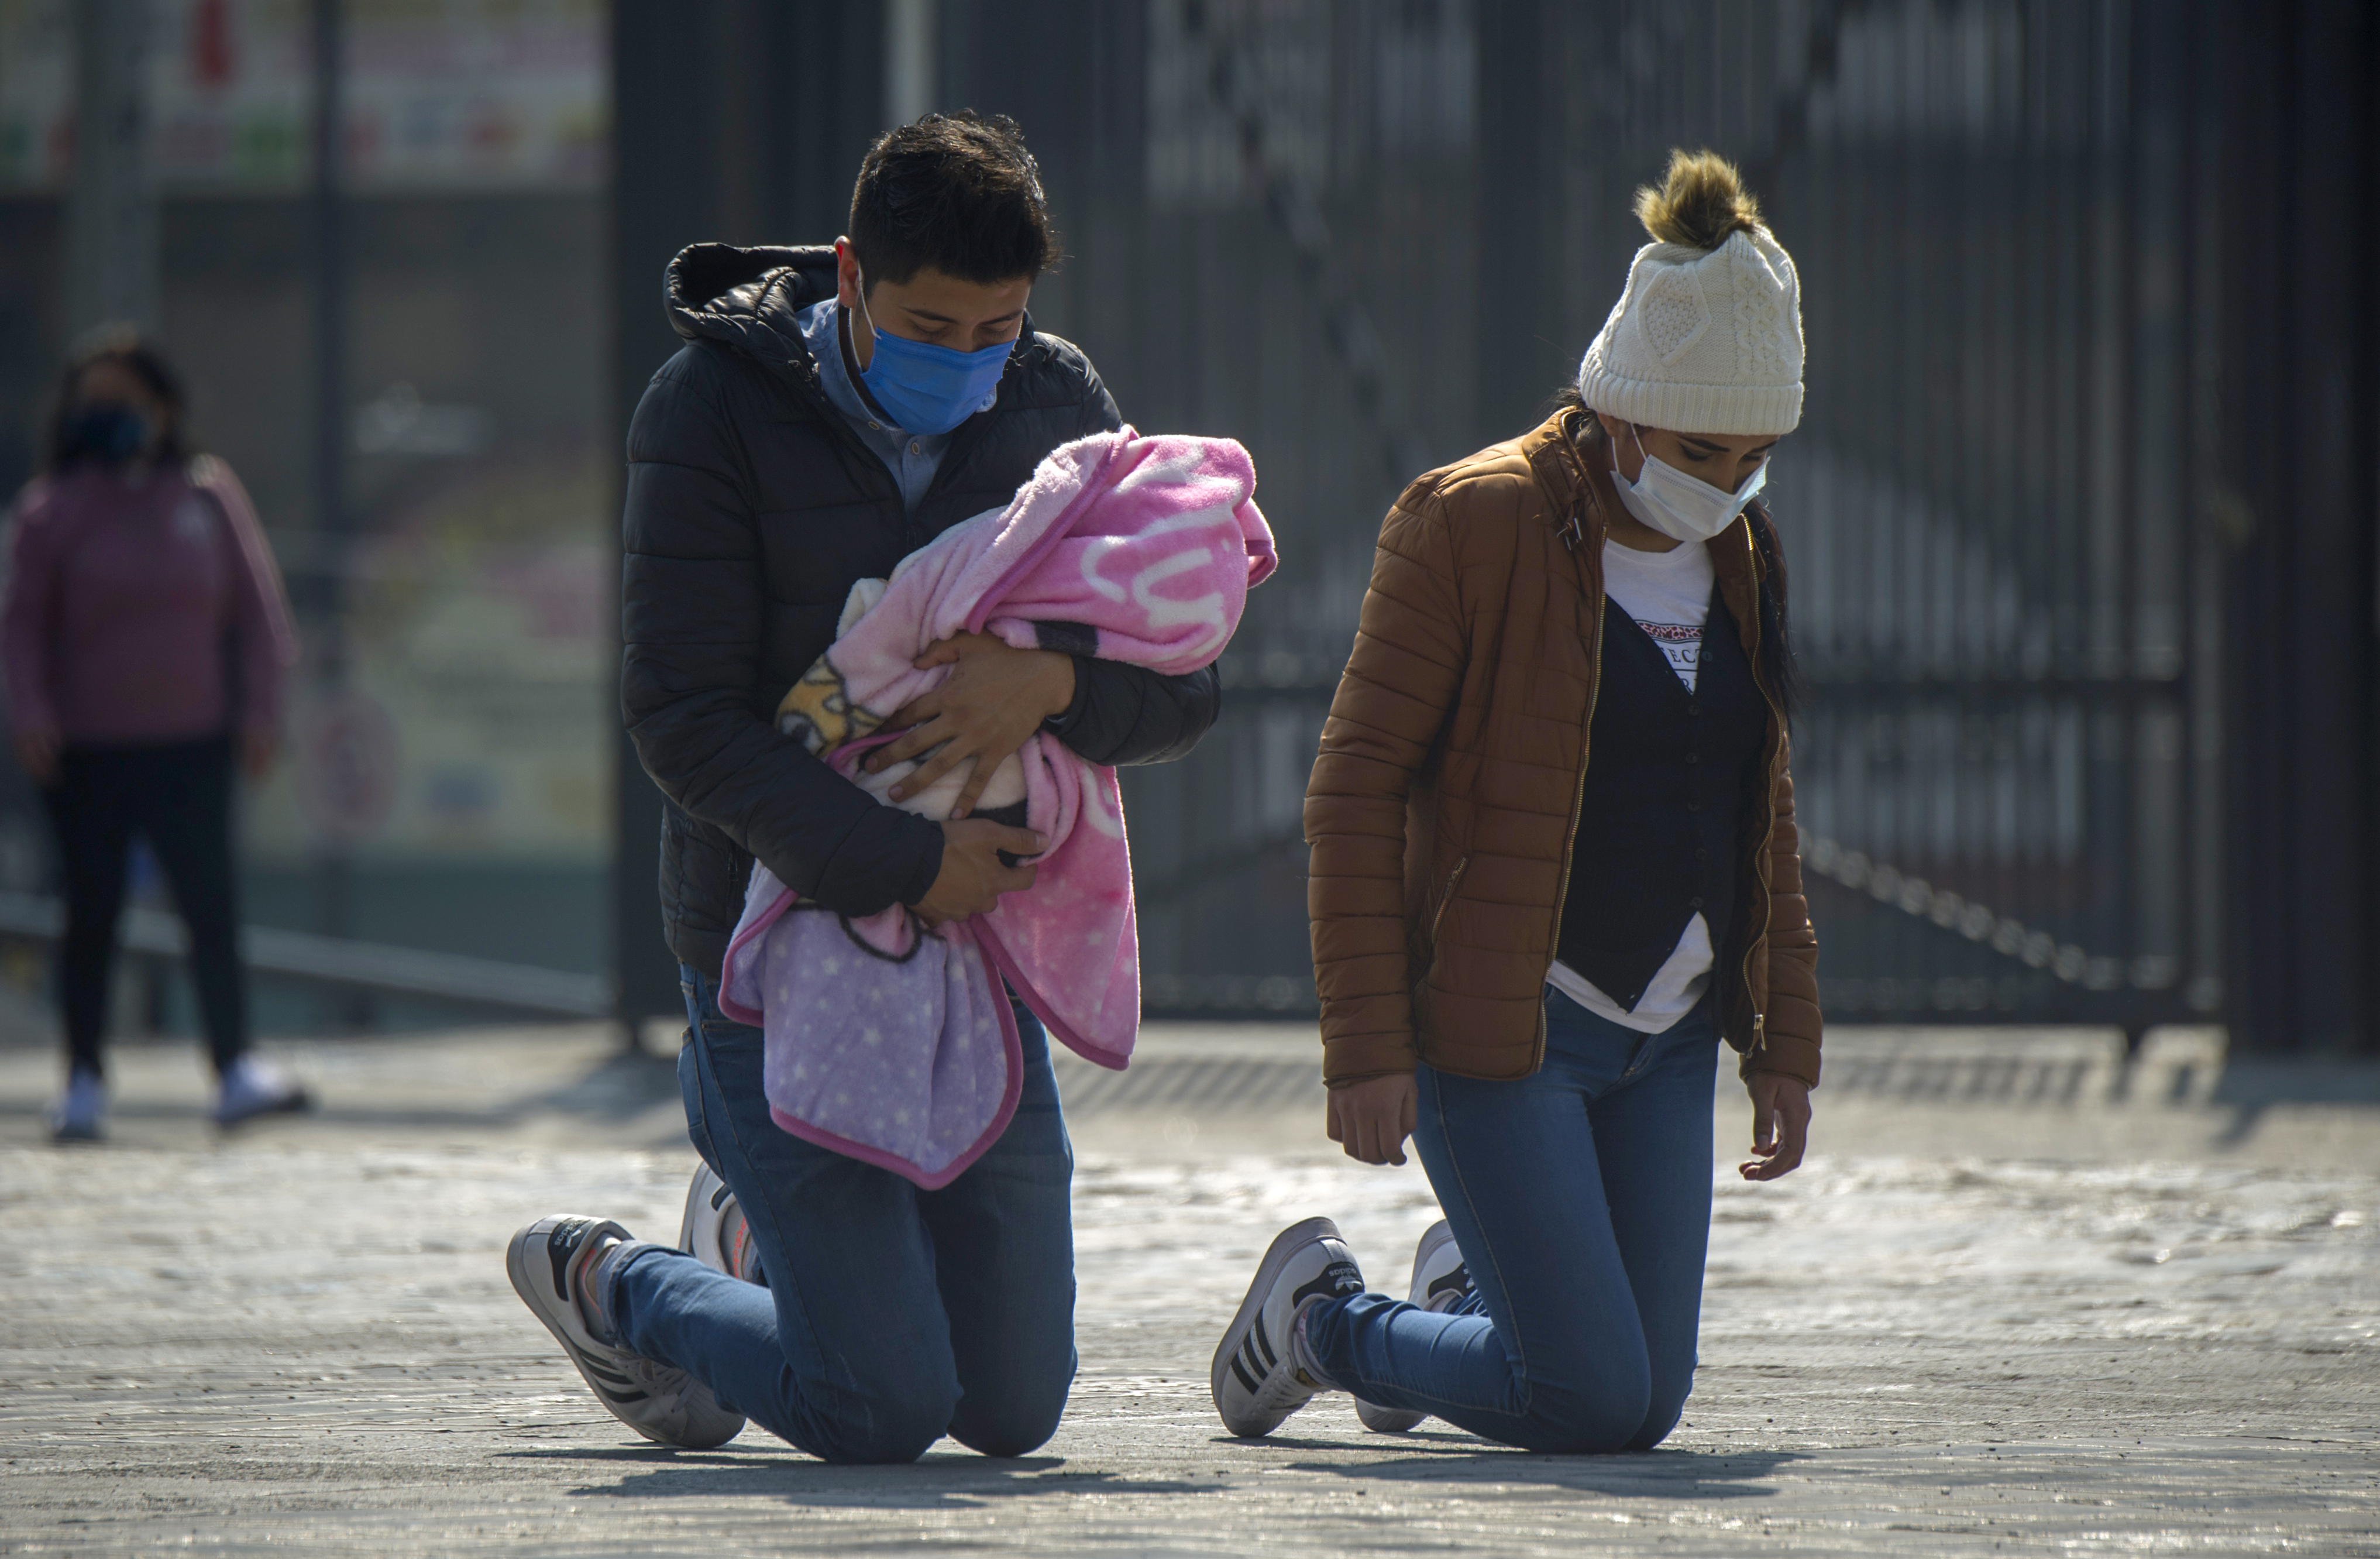 A couple with their baby walk on their kneels to the Basilica of Guadalupe in Mexico City, on December 7, 2020, amid the COVID-19 novel coronavirus pandemic. - The Basilica of Guadalupe will remain closed from December 10 to 13 during the festivities of the Virgen Morena to avoid crowds and minimize the risks of possible contagion of COVID-19 among pilgrims. (Photo by Claudio CRUZ / AFP)